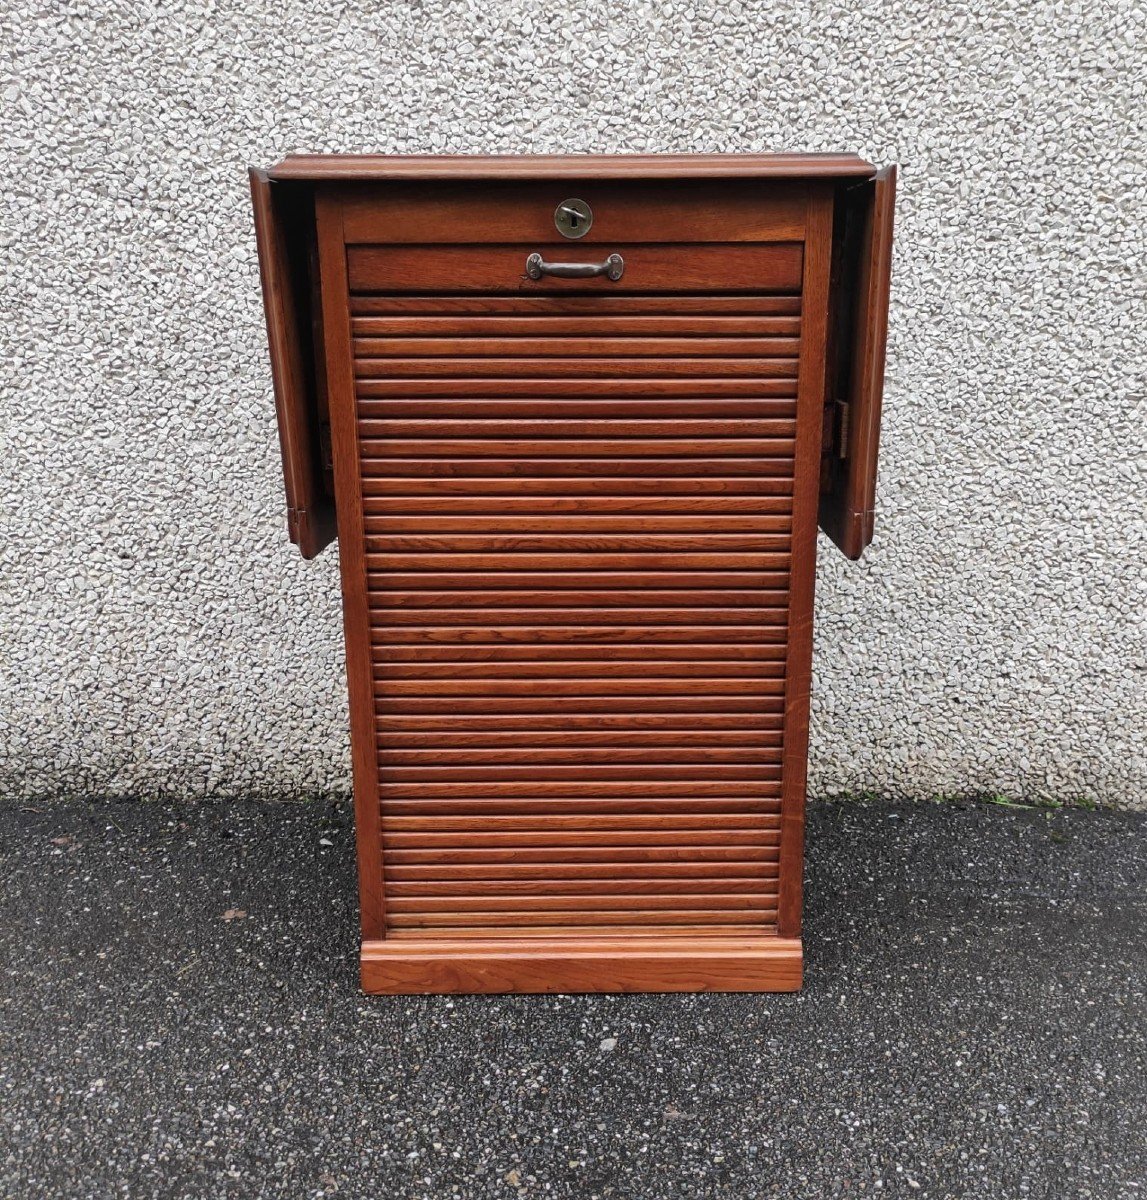 Rolling Shutter Cabinet With Flaps, Early 1900s.-photo-3